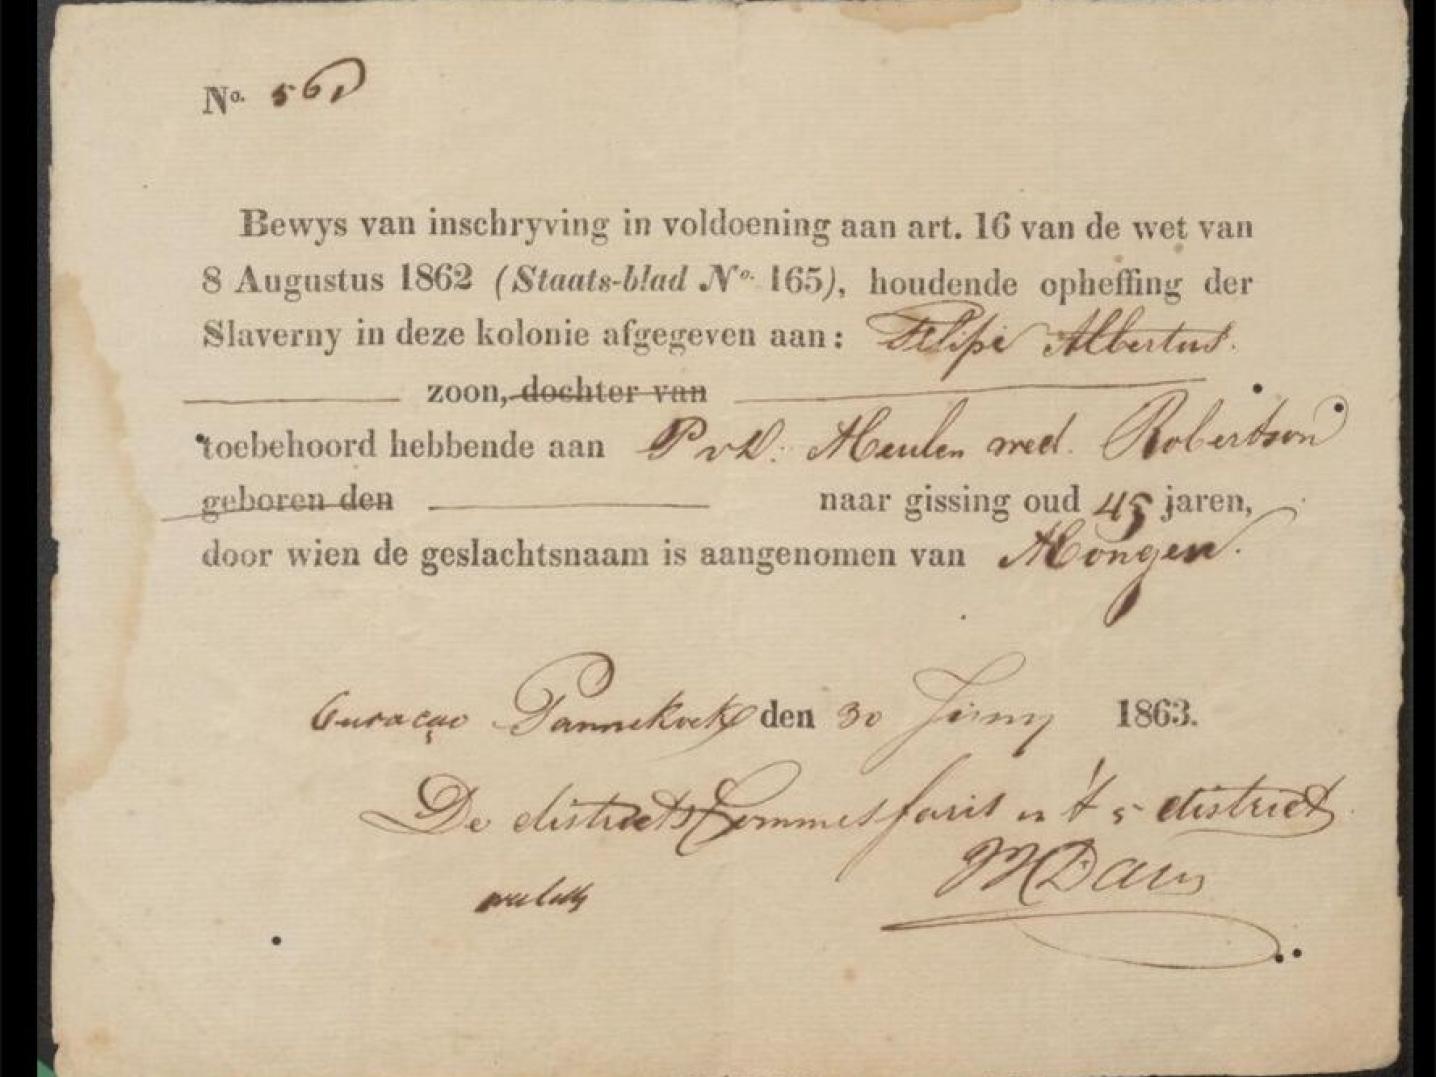 Proof of registration and compliance with art. 16 of the Abolition of Slavery Act, 1863 June-July, 1863. Archives of the District Masters of the 3rd, 4th and 5th district, Juliana-Brenneker Collection. Photo: National Archives of Curaçao. 